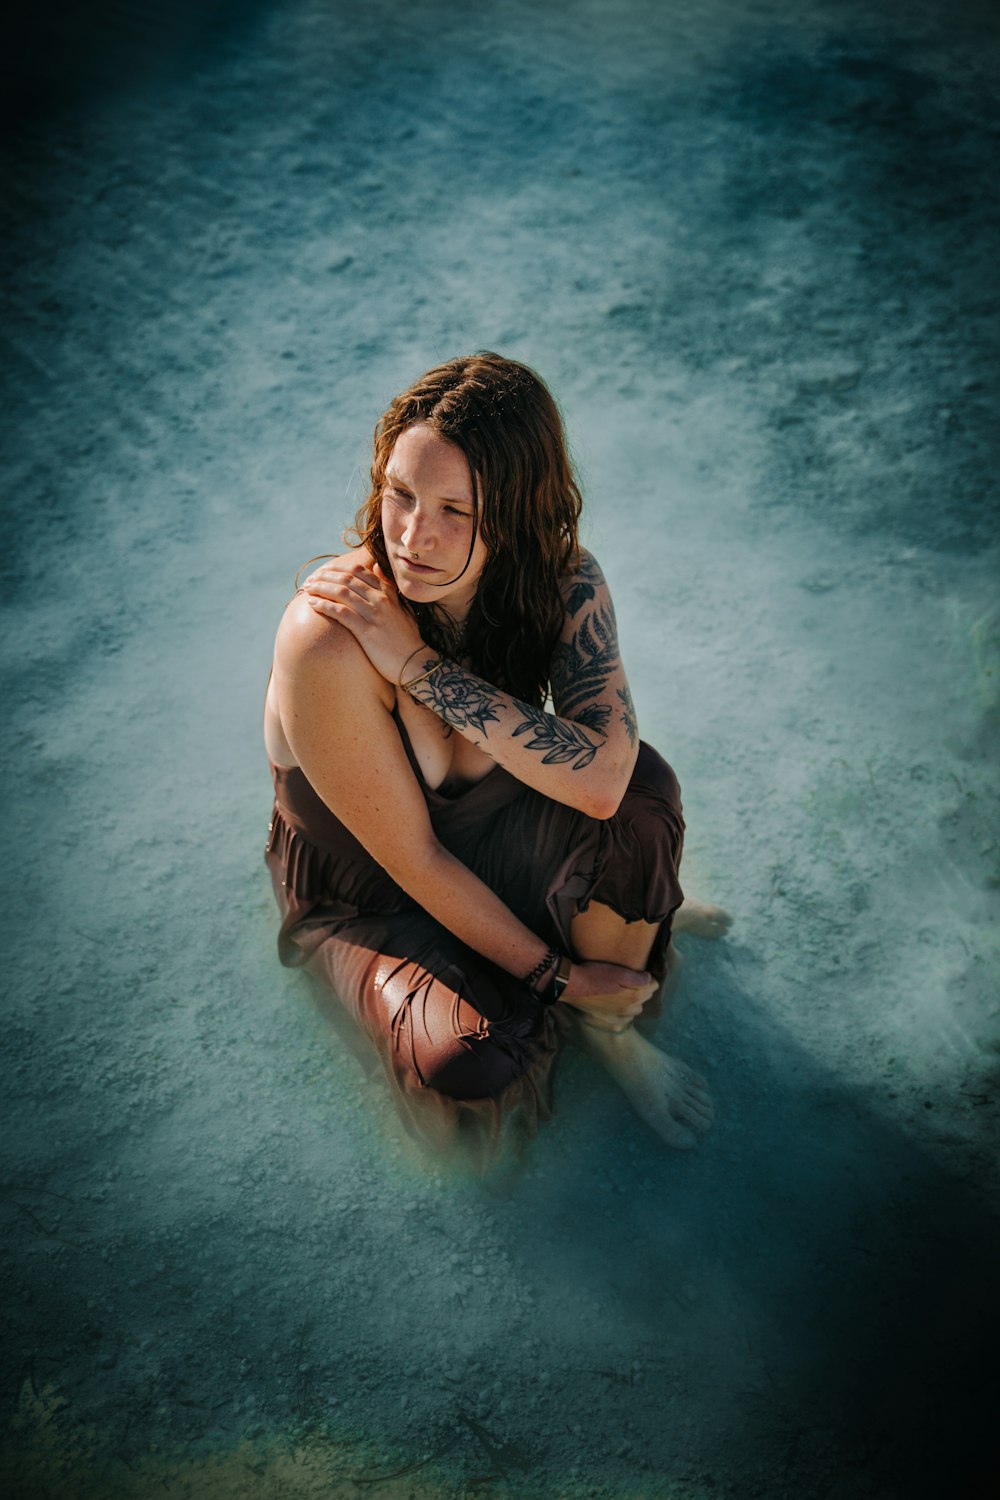 a woman sitting on the ground with a tattoo on her arm